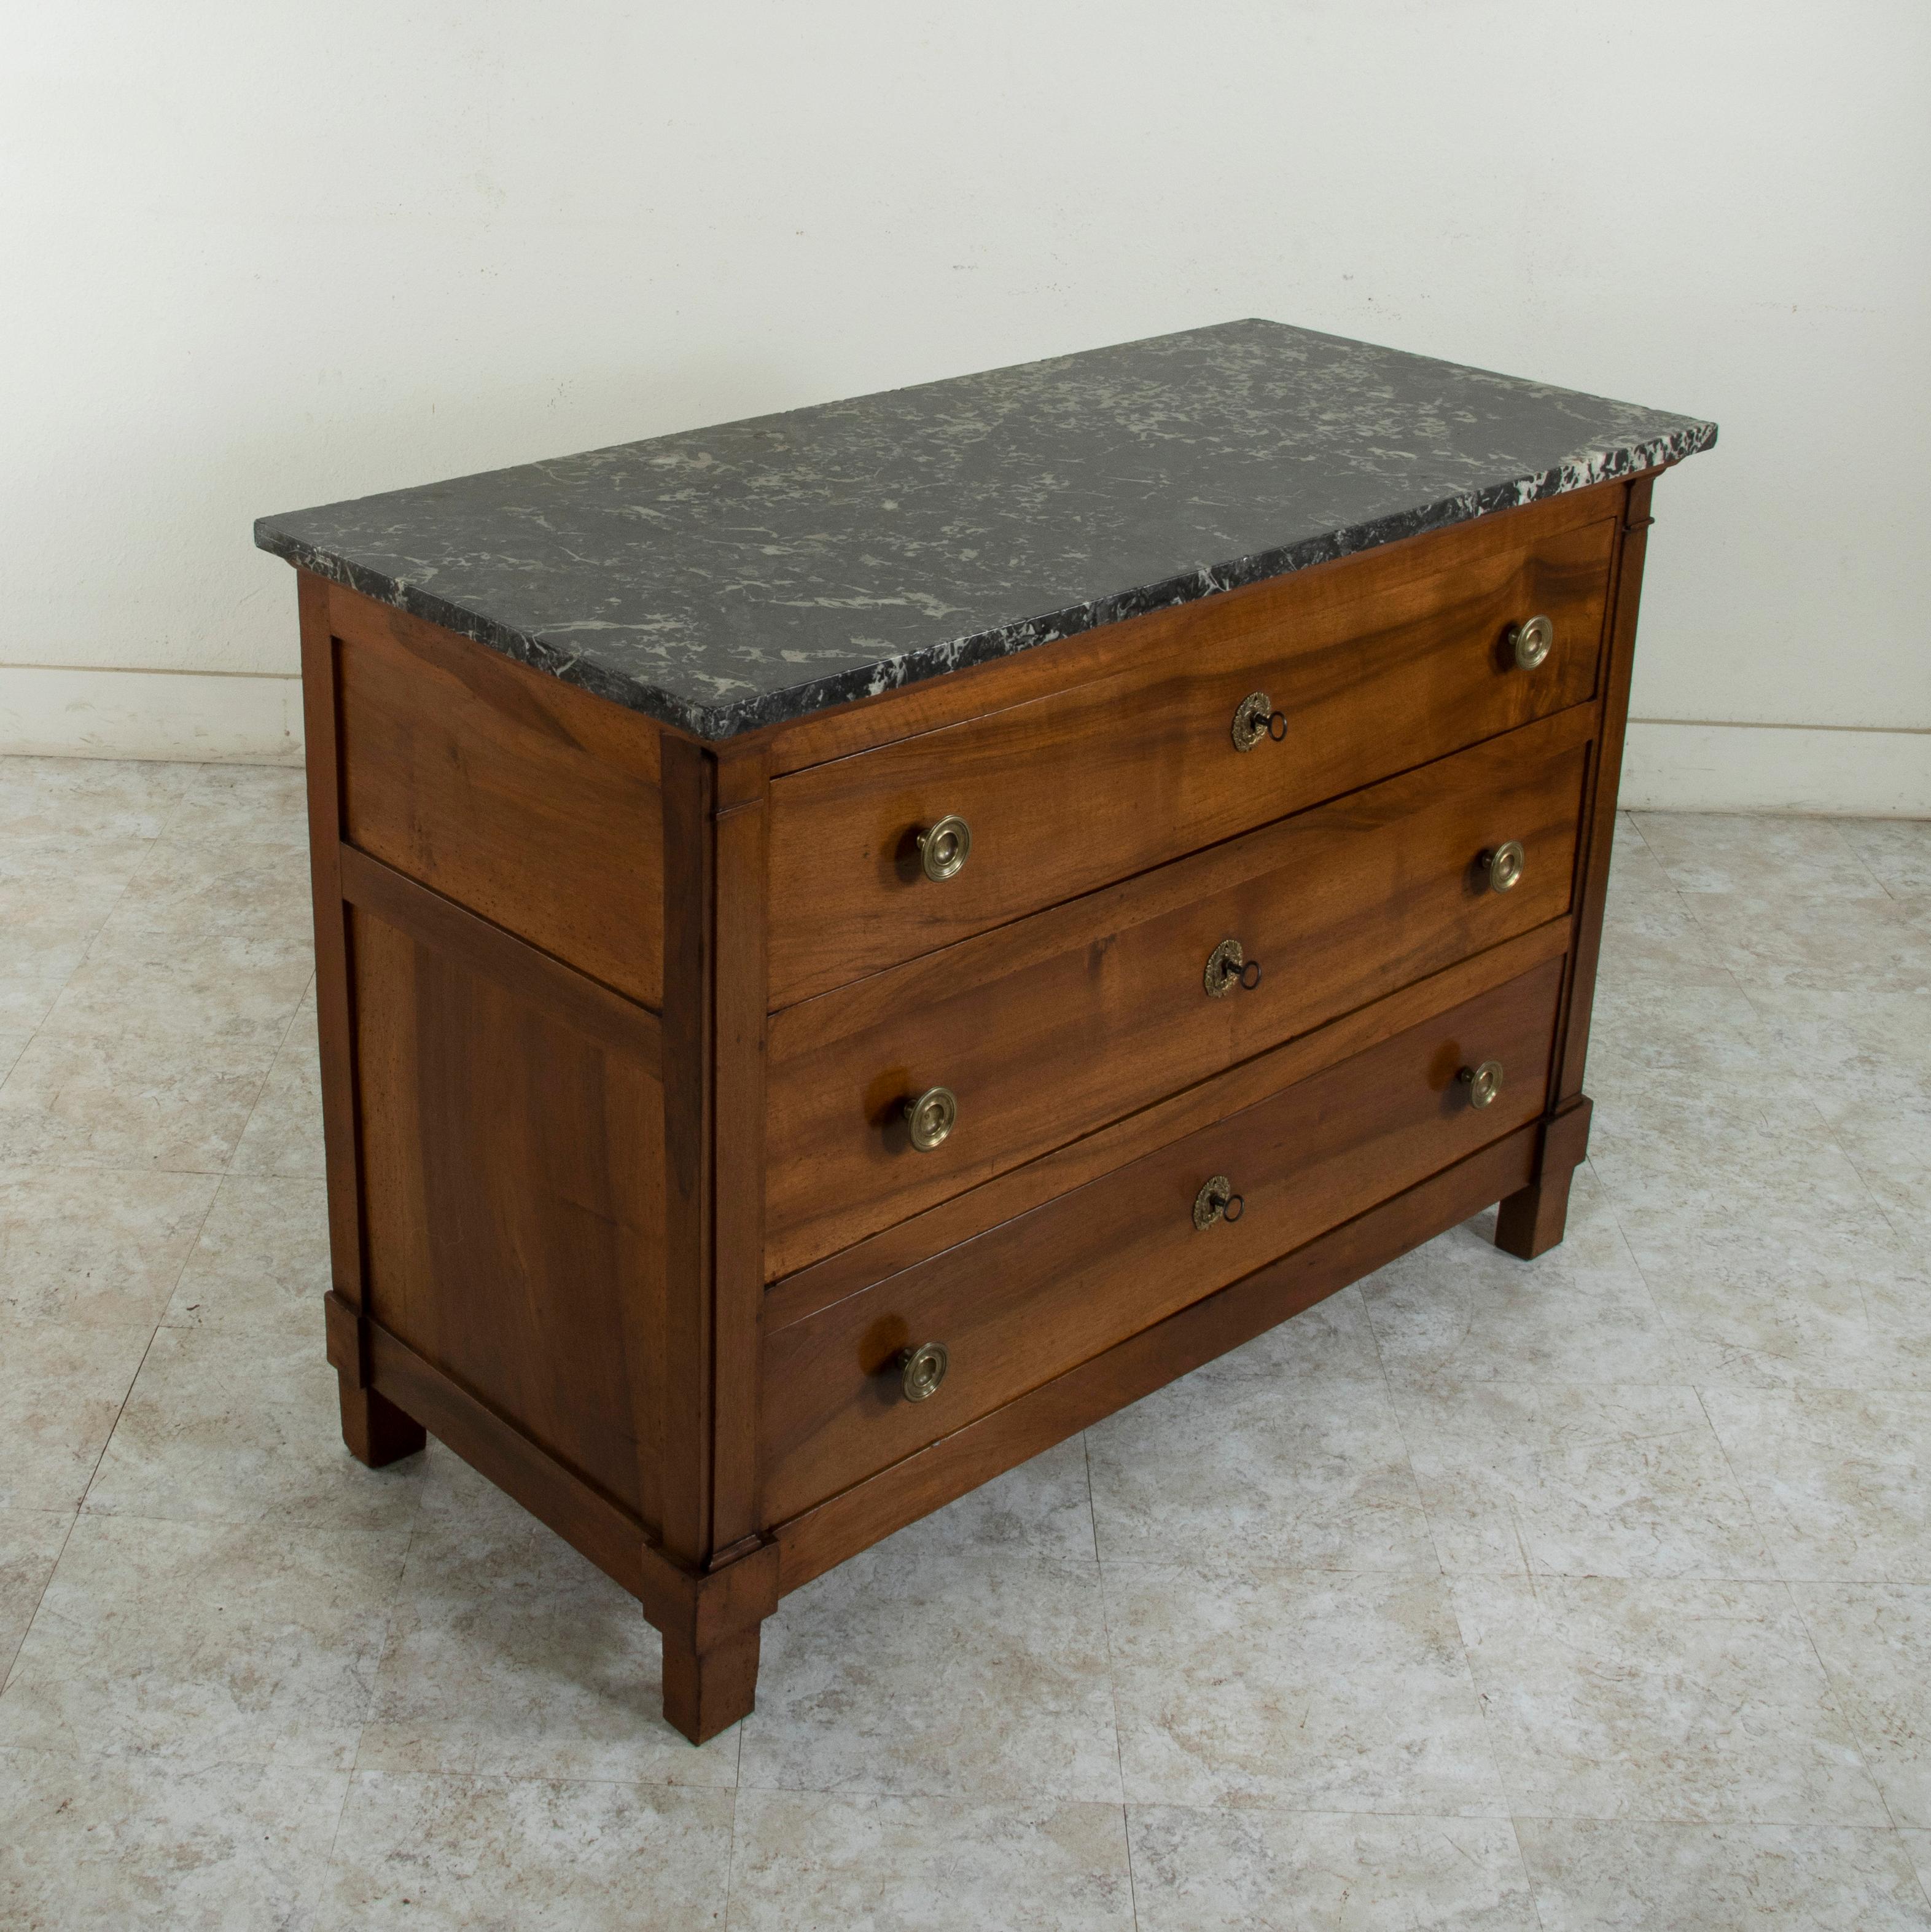 This French Restauration period walnut commode or chest of drawers from the early nineteenth century features its original Saint Anne marble top. Constructed of solid French walnut, its three drawers of dovetail construction are flanked by square